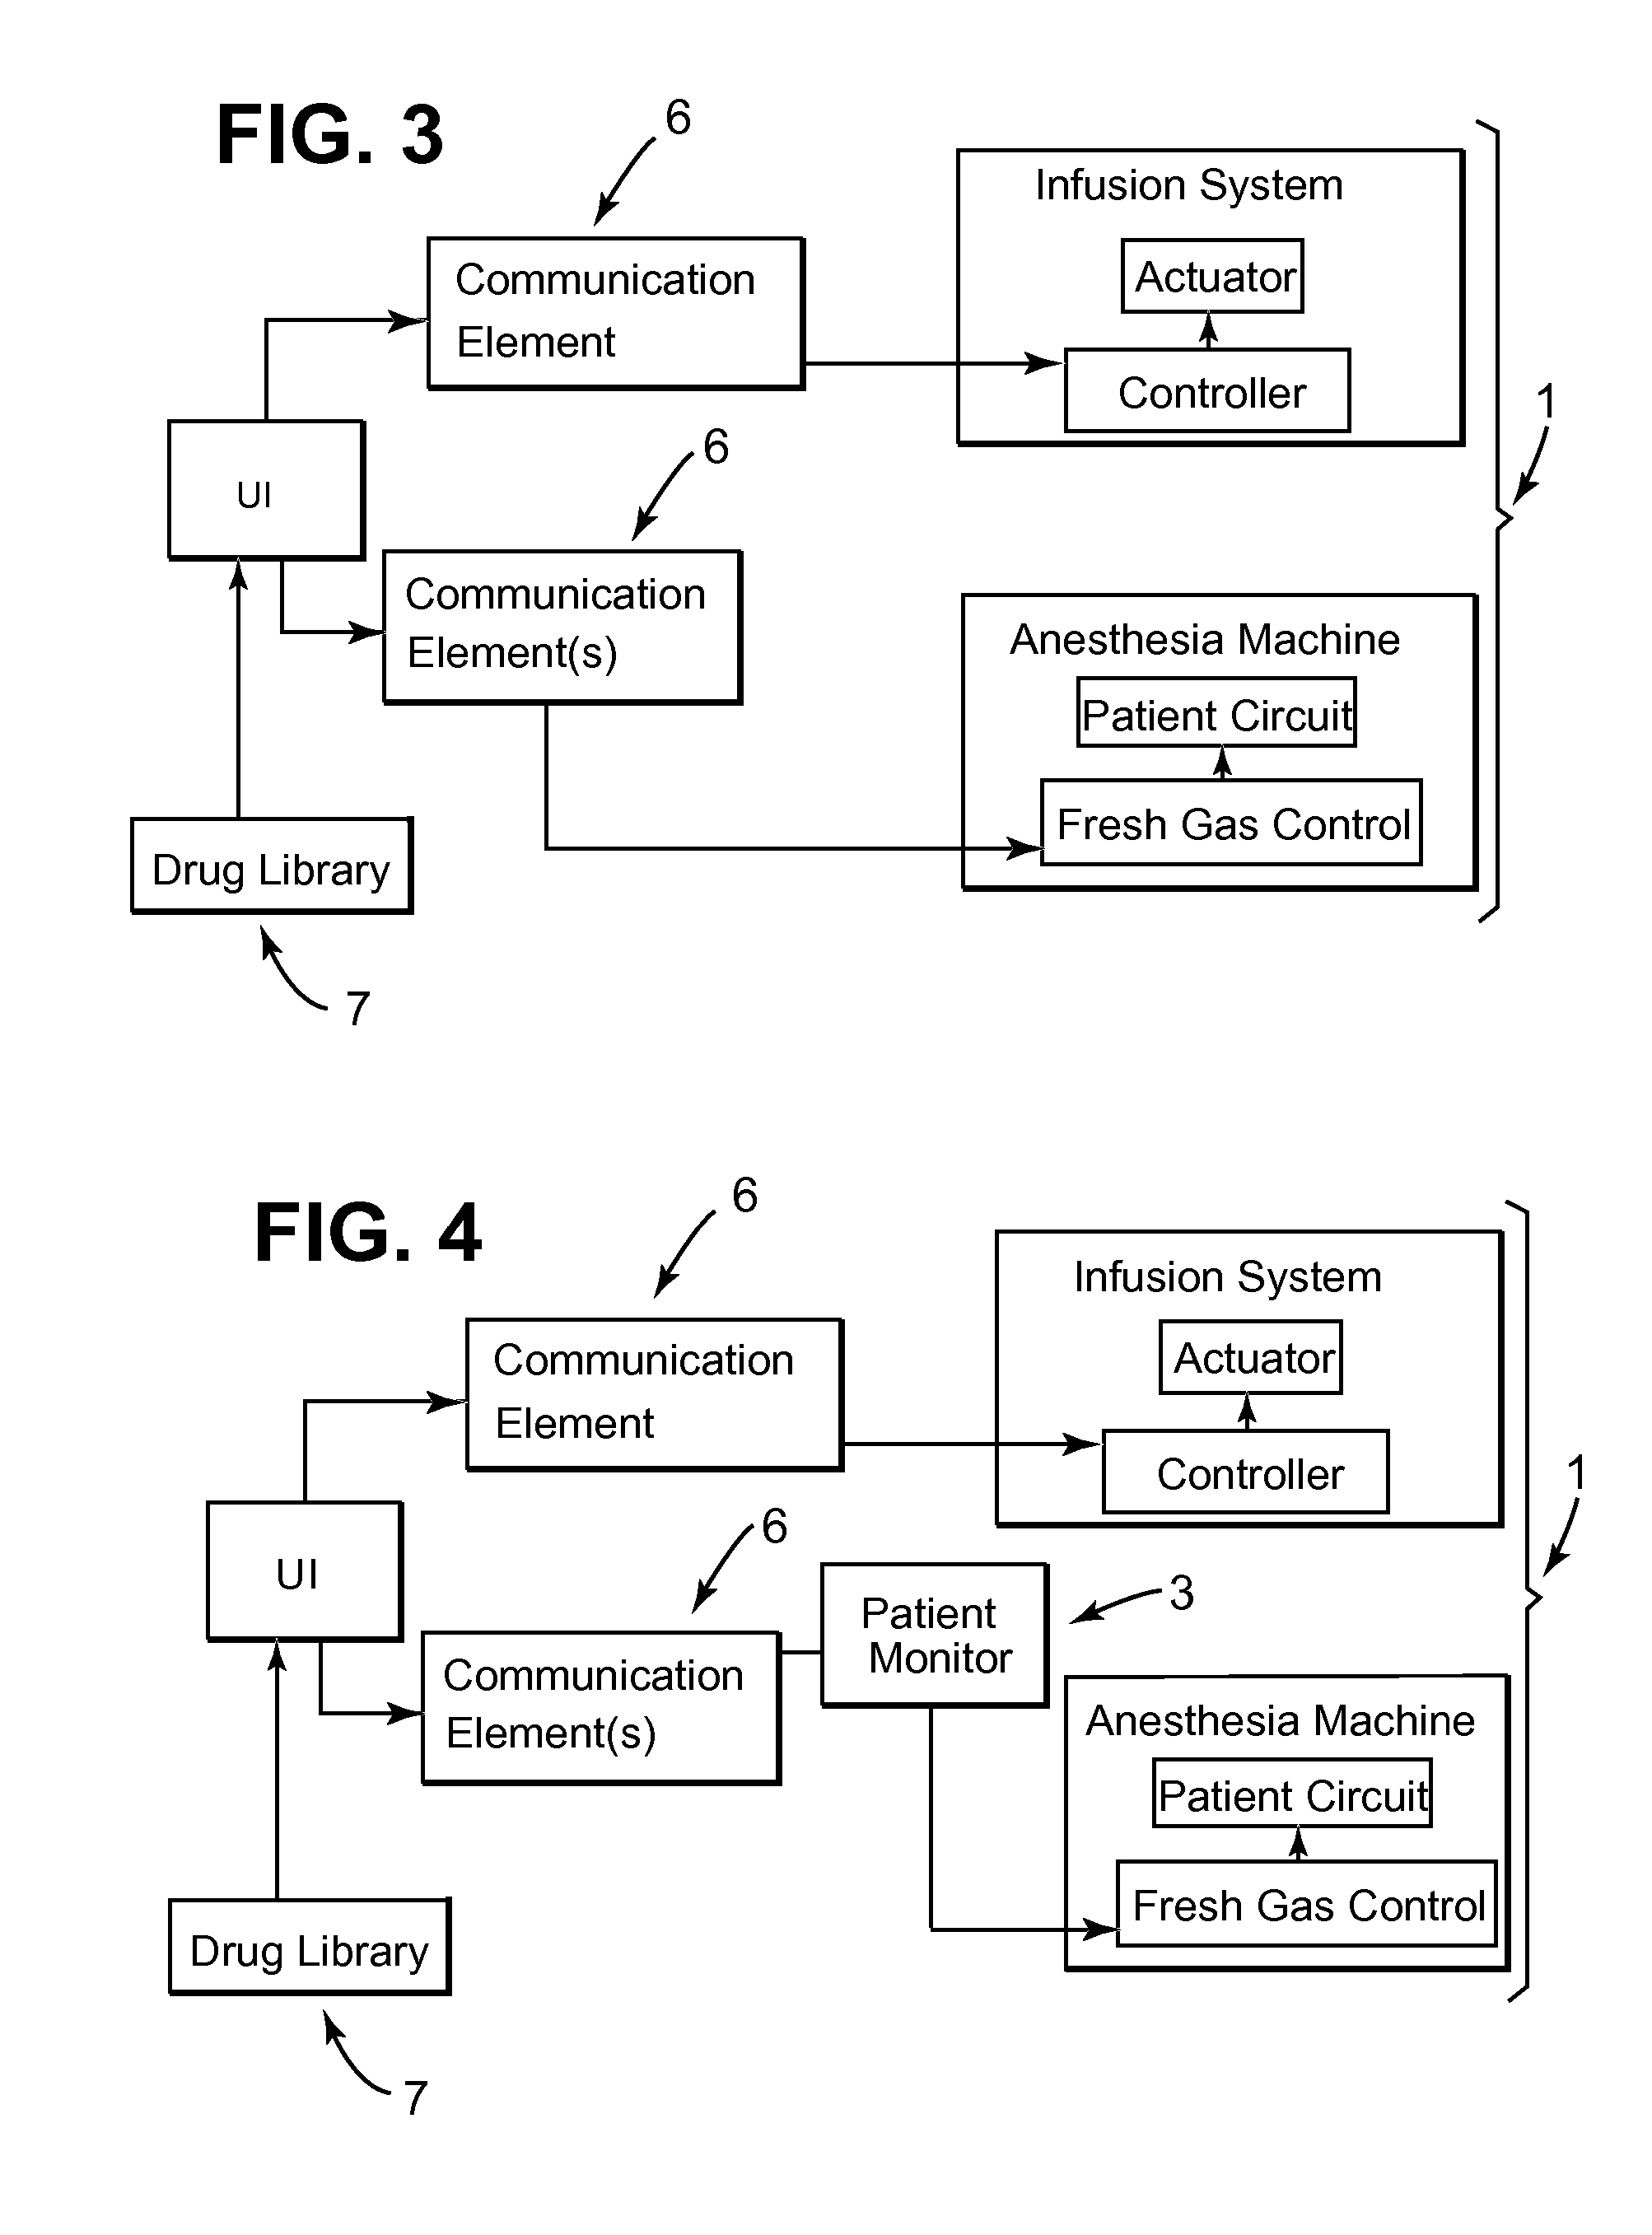 System for delivering anesthesia drugs to a patient